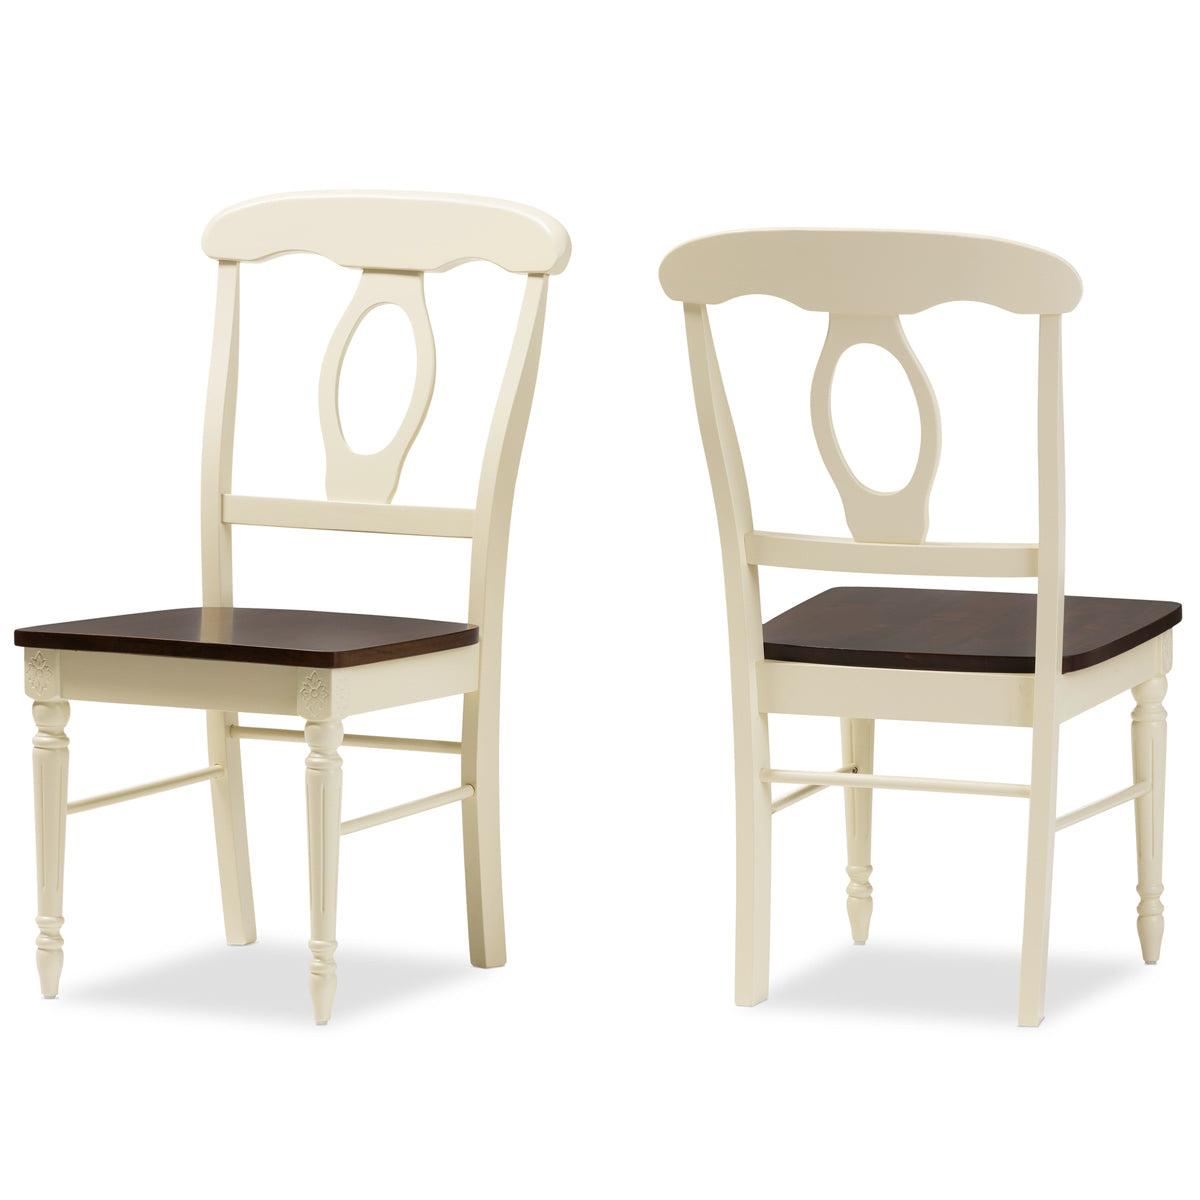 Baxton Studio Napoleon French Country Cottage Buttermilk and "Cherry" Brown Finishing Wood Dining Chair Baxton Studio-dining chair-Minimal And Modern - 2